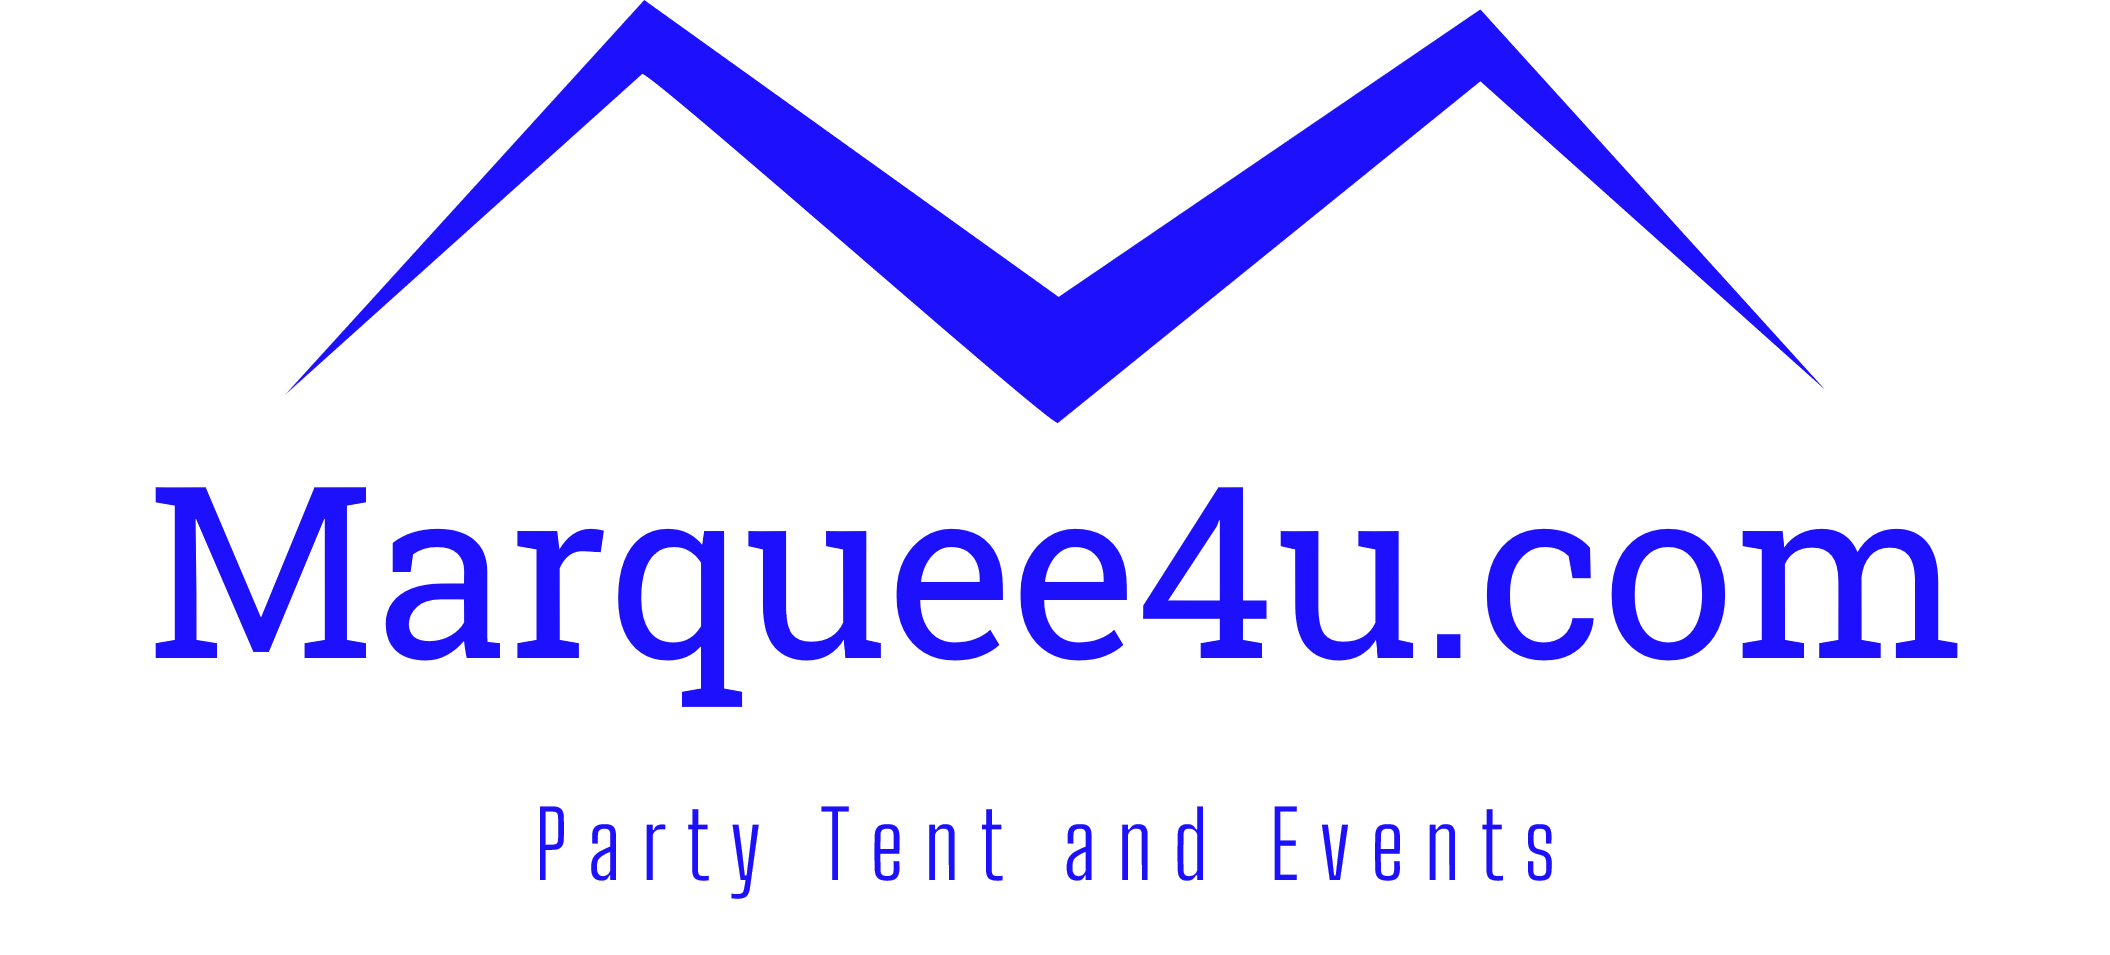 Marquee 4U